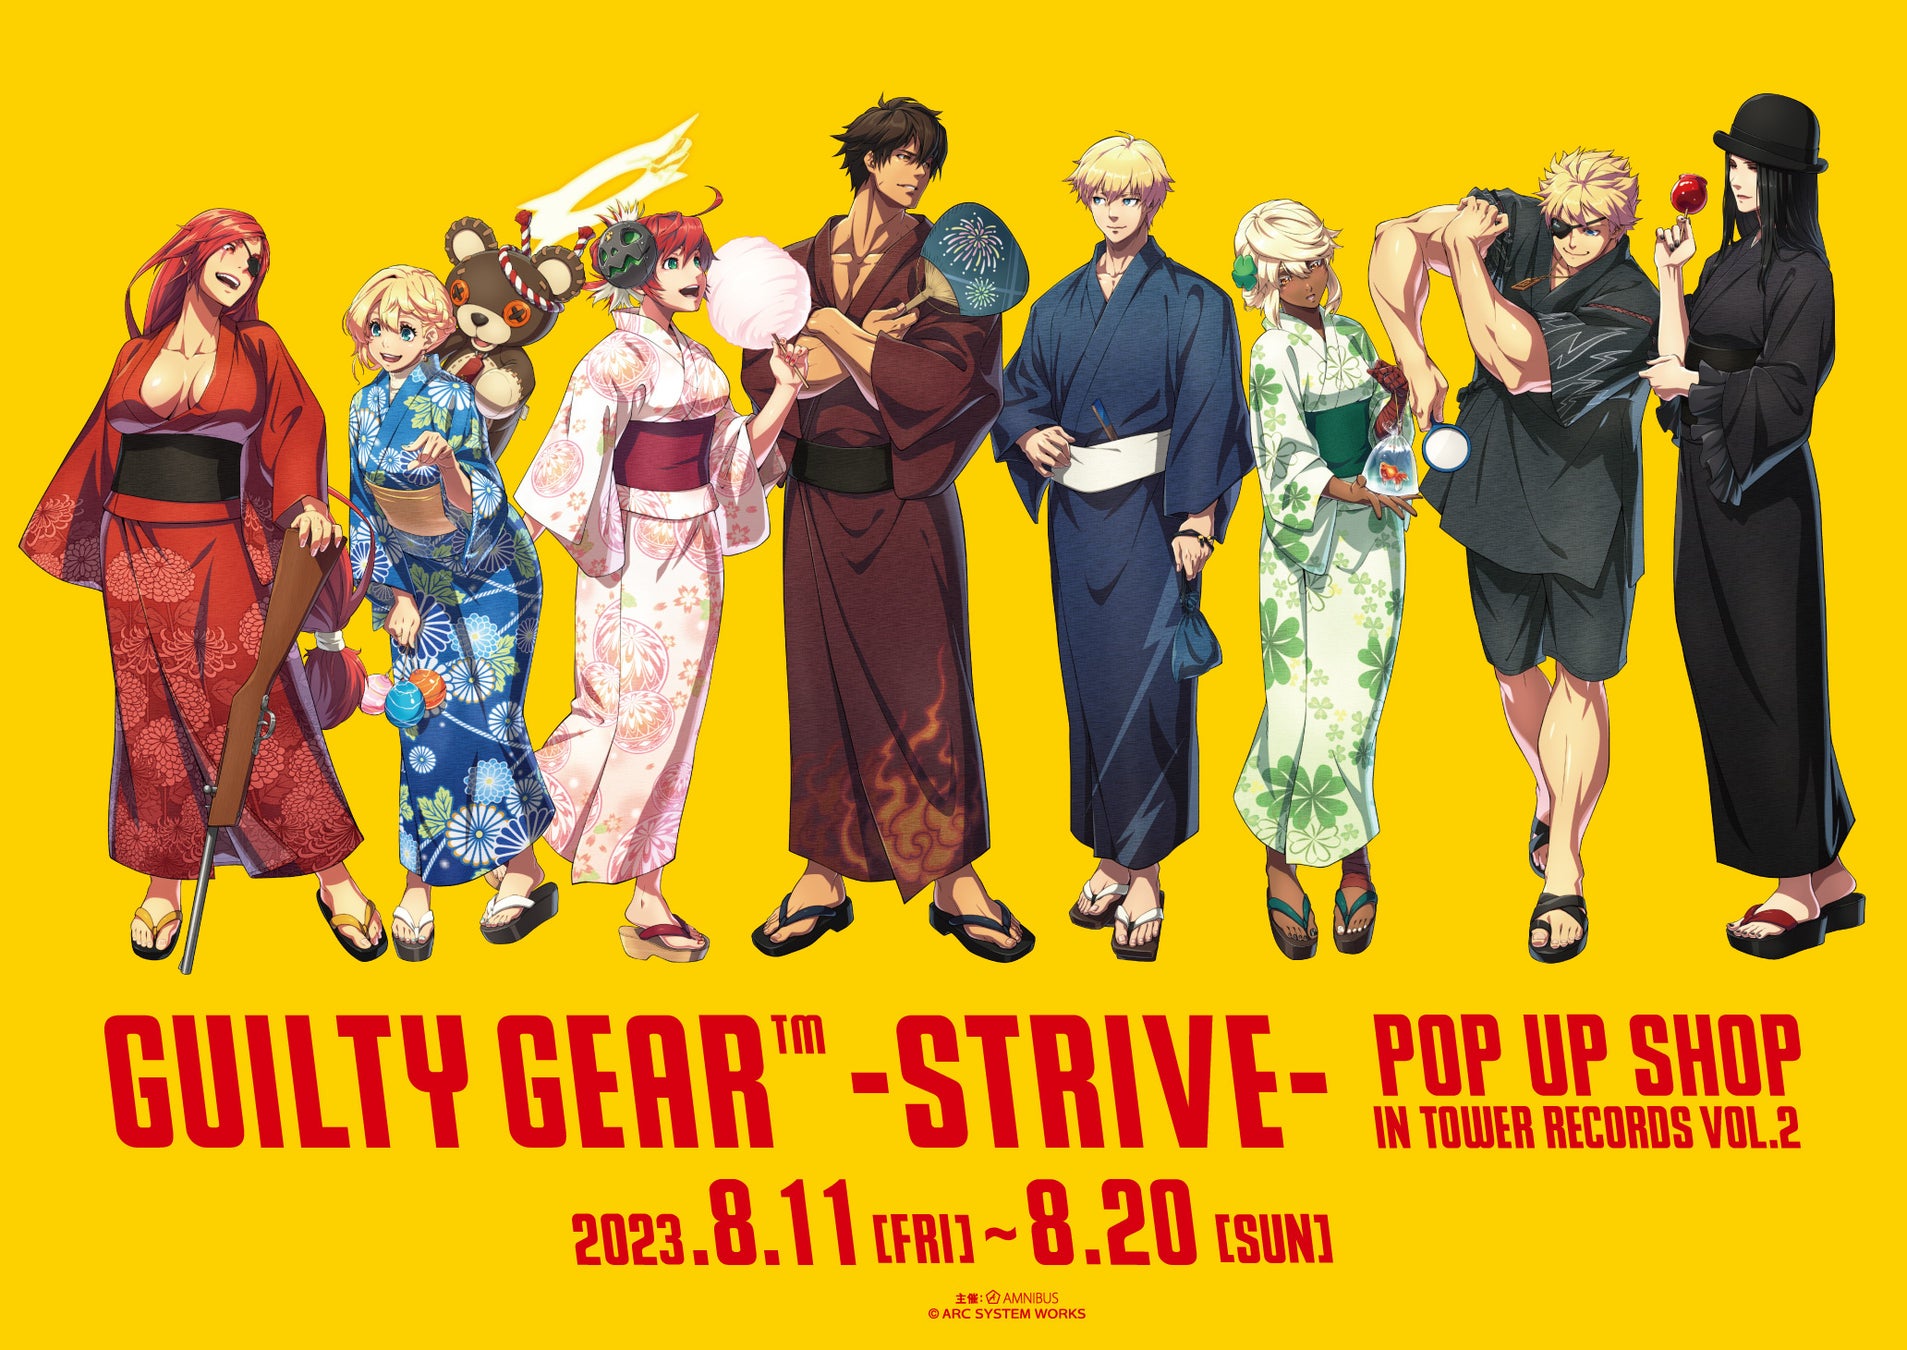 『NARUTO -ナルト- 疾風伝』のイベント「NARUTO -ナルト- 疾風伝 20th Anniversary POP UP STORE in ロフト」の開催が決定！